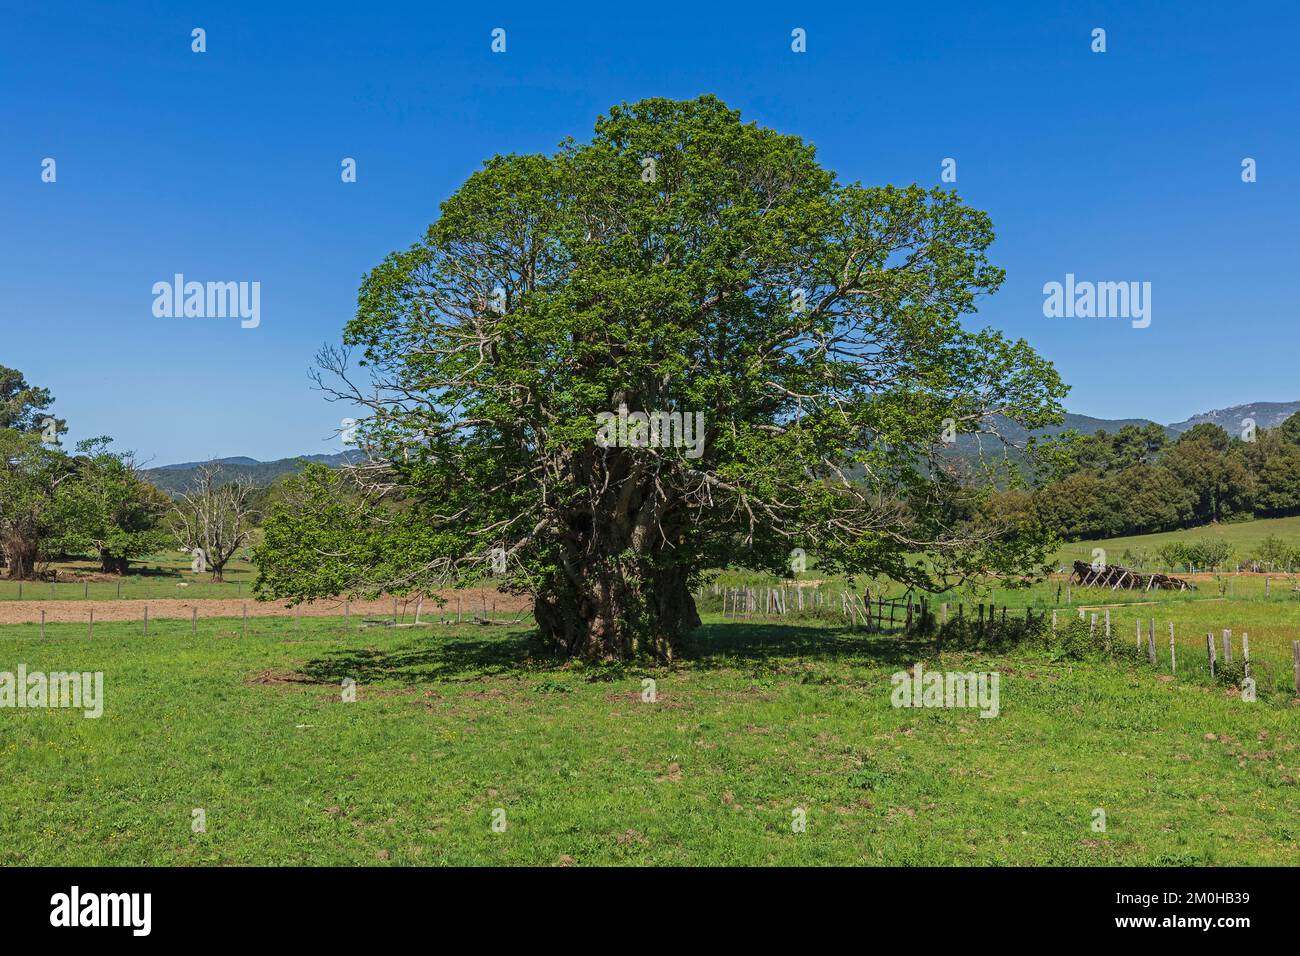 France, Corse du Sud, Zonza, tree in the middle of a field Stock Photo